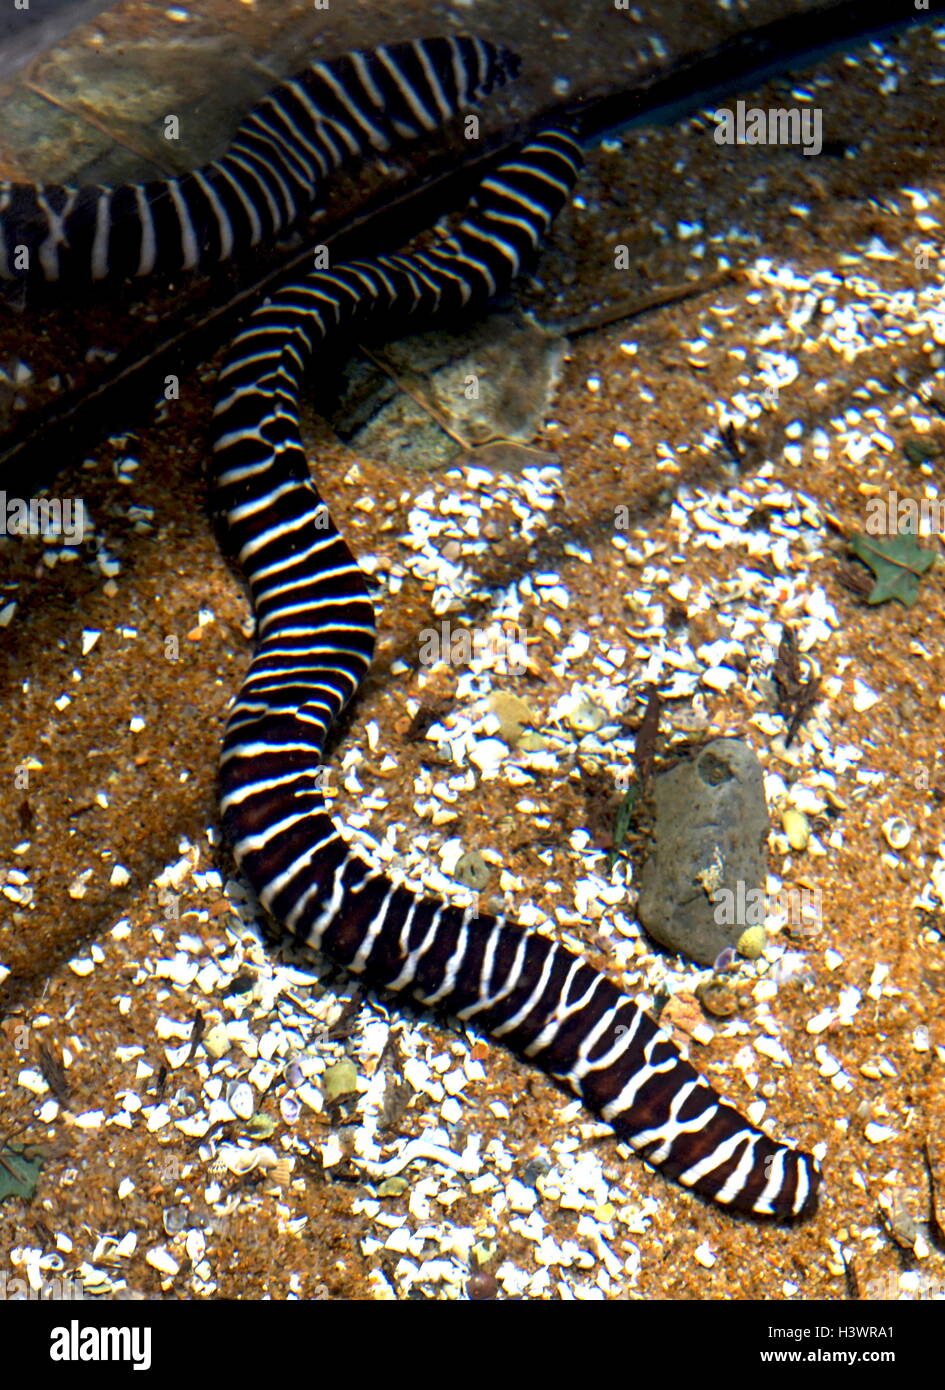 Zebra Moray Eel ( Gymnomuraena zebra), a species of marine fish in the family Muraenidae. It is the only member of the genus Gymnomuraena, though it sometimes has been included in Echidna instead. Stock Photo